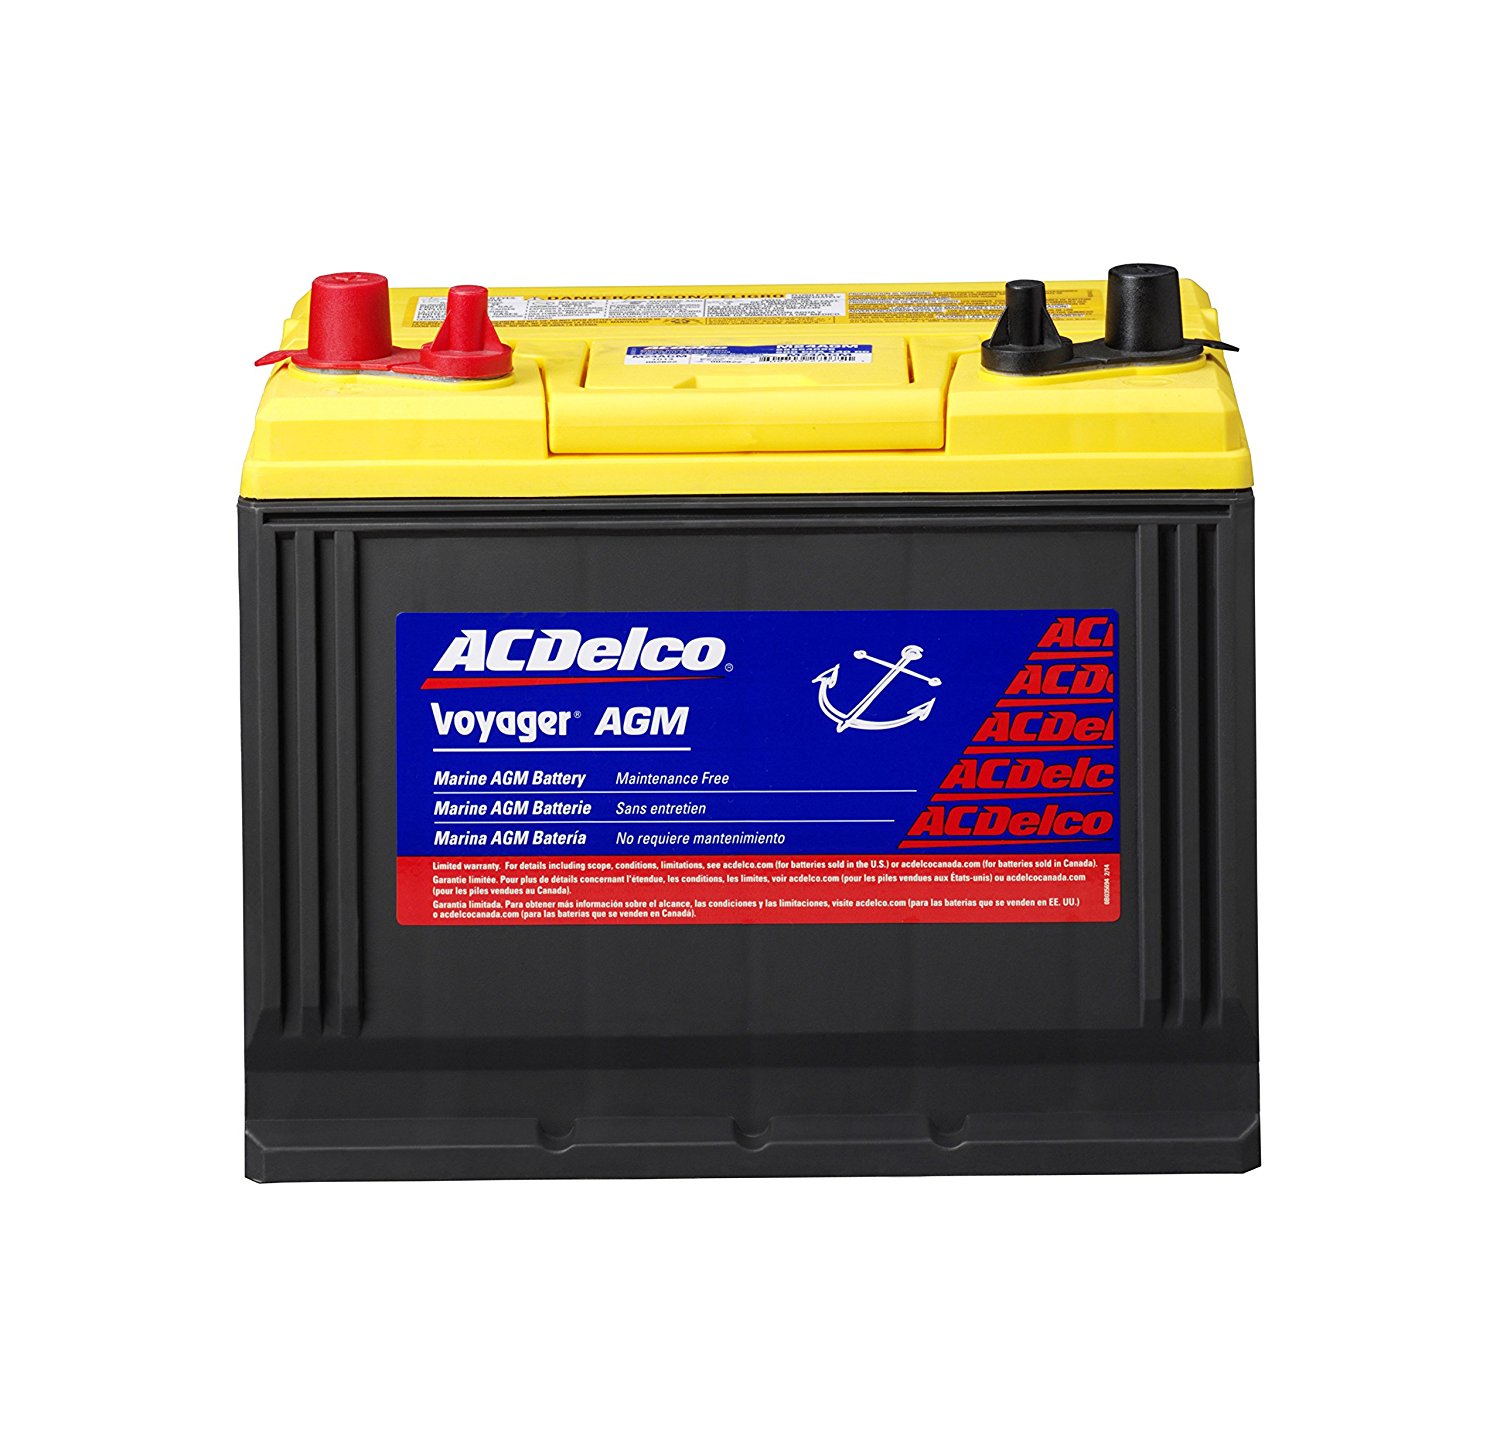 ACDelco Professional AGM Voyager – Car Battery World Ac Delco Voyager Marine Battery M29mf